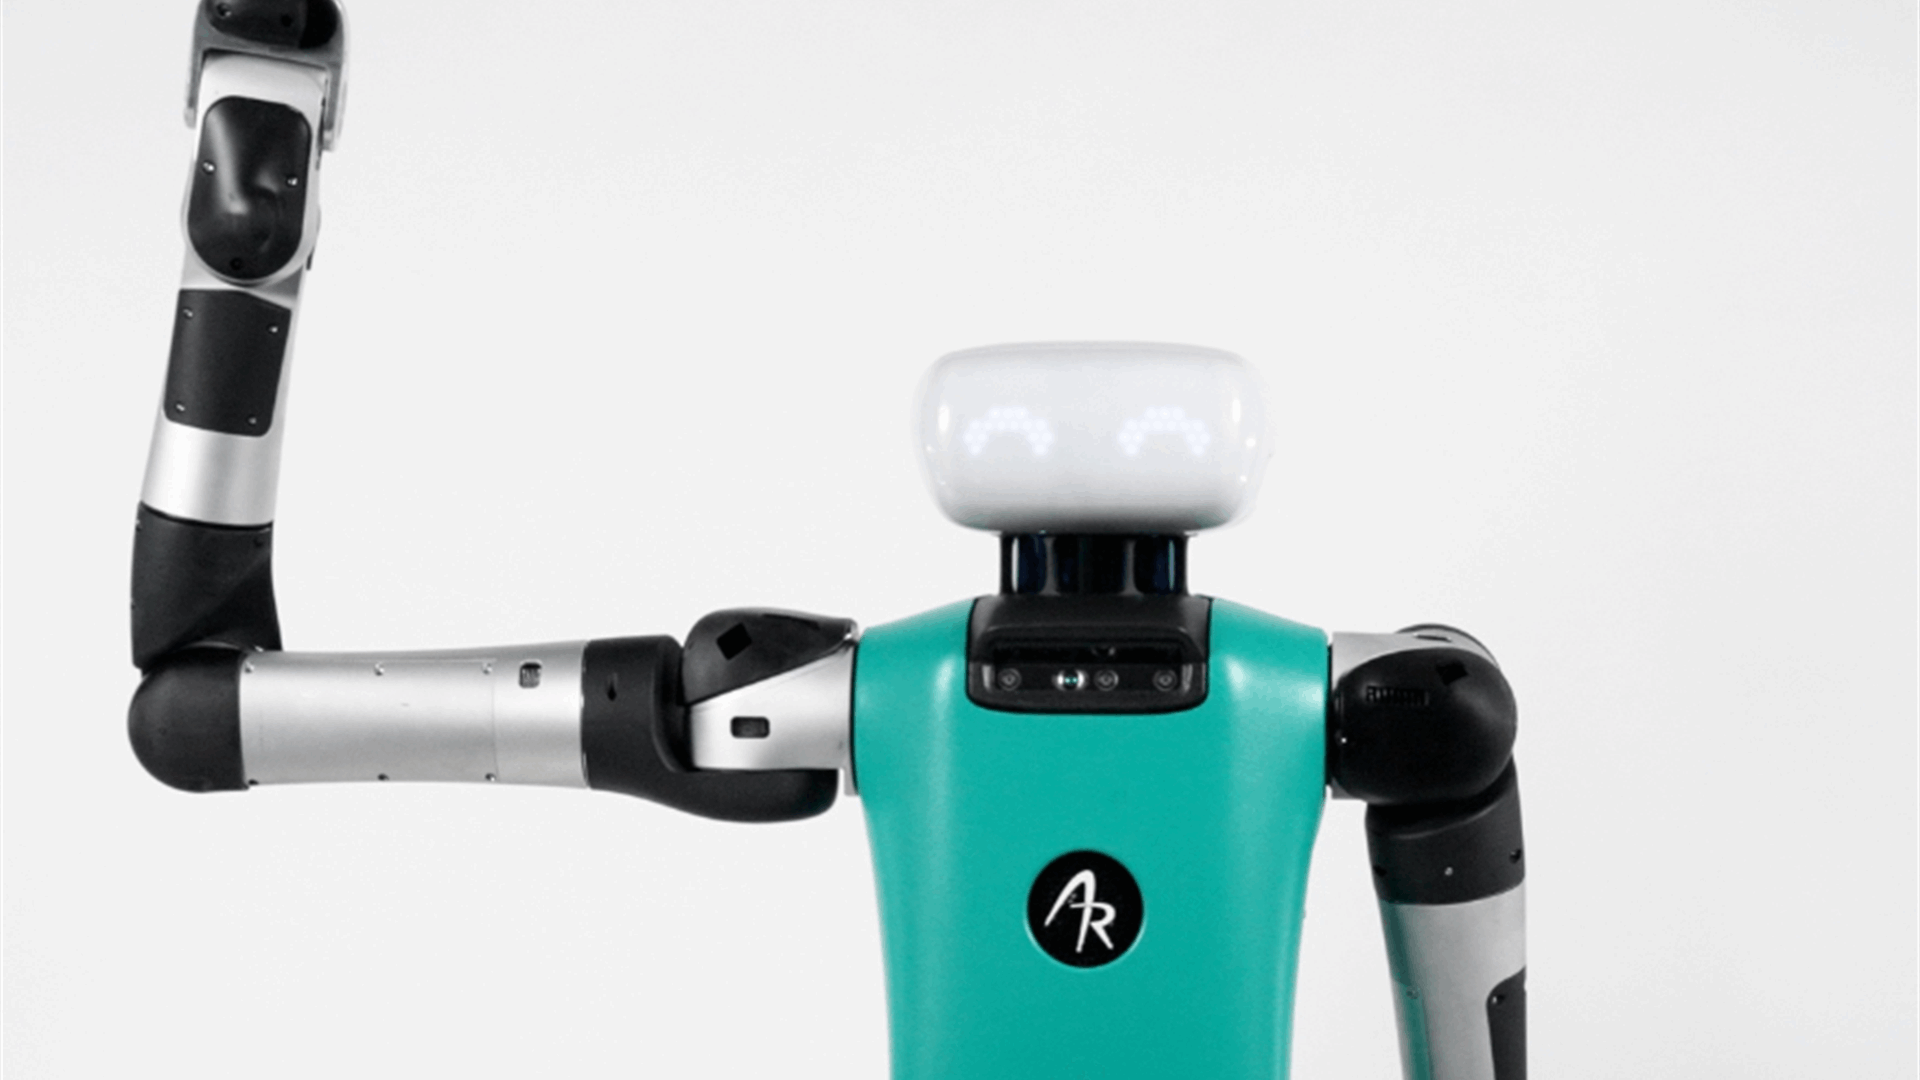 Fetch founder Melonee Wise joins Agility Robotics at CTO